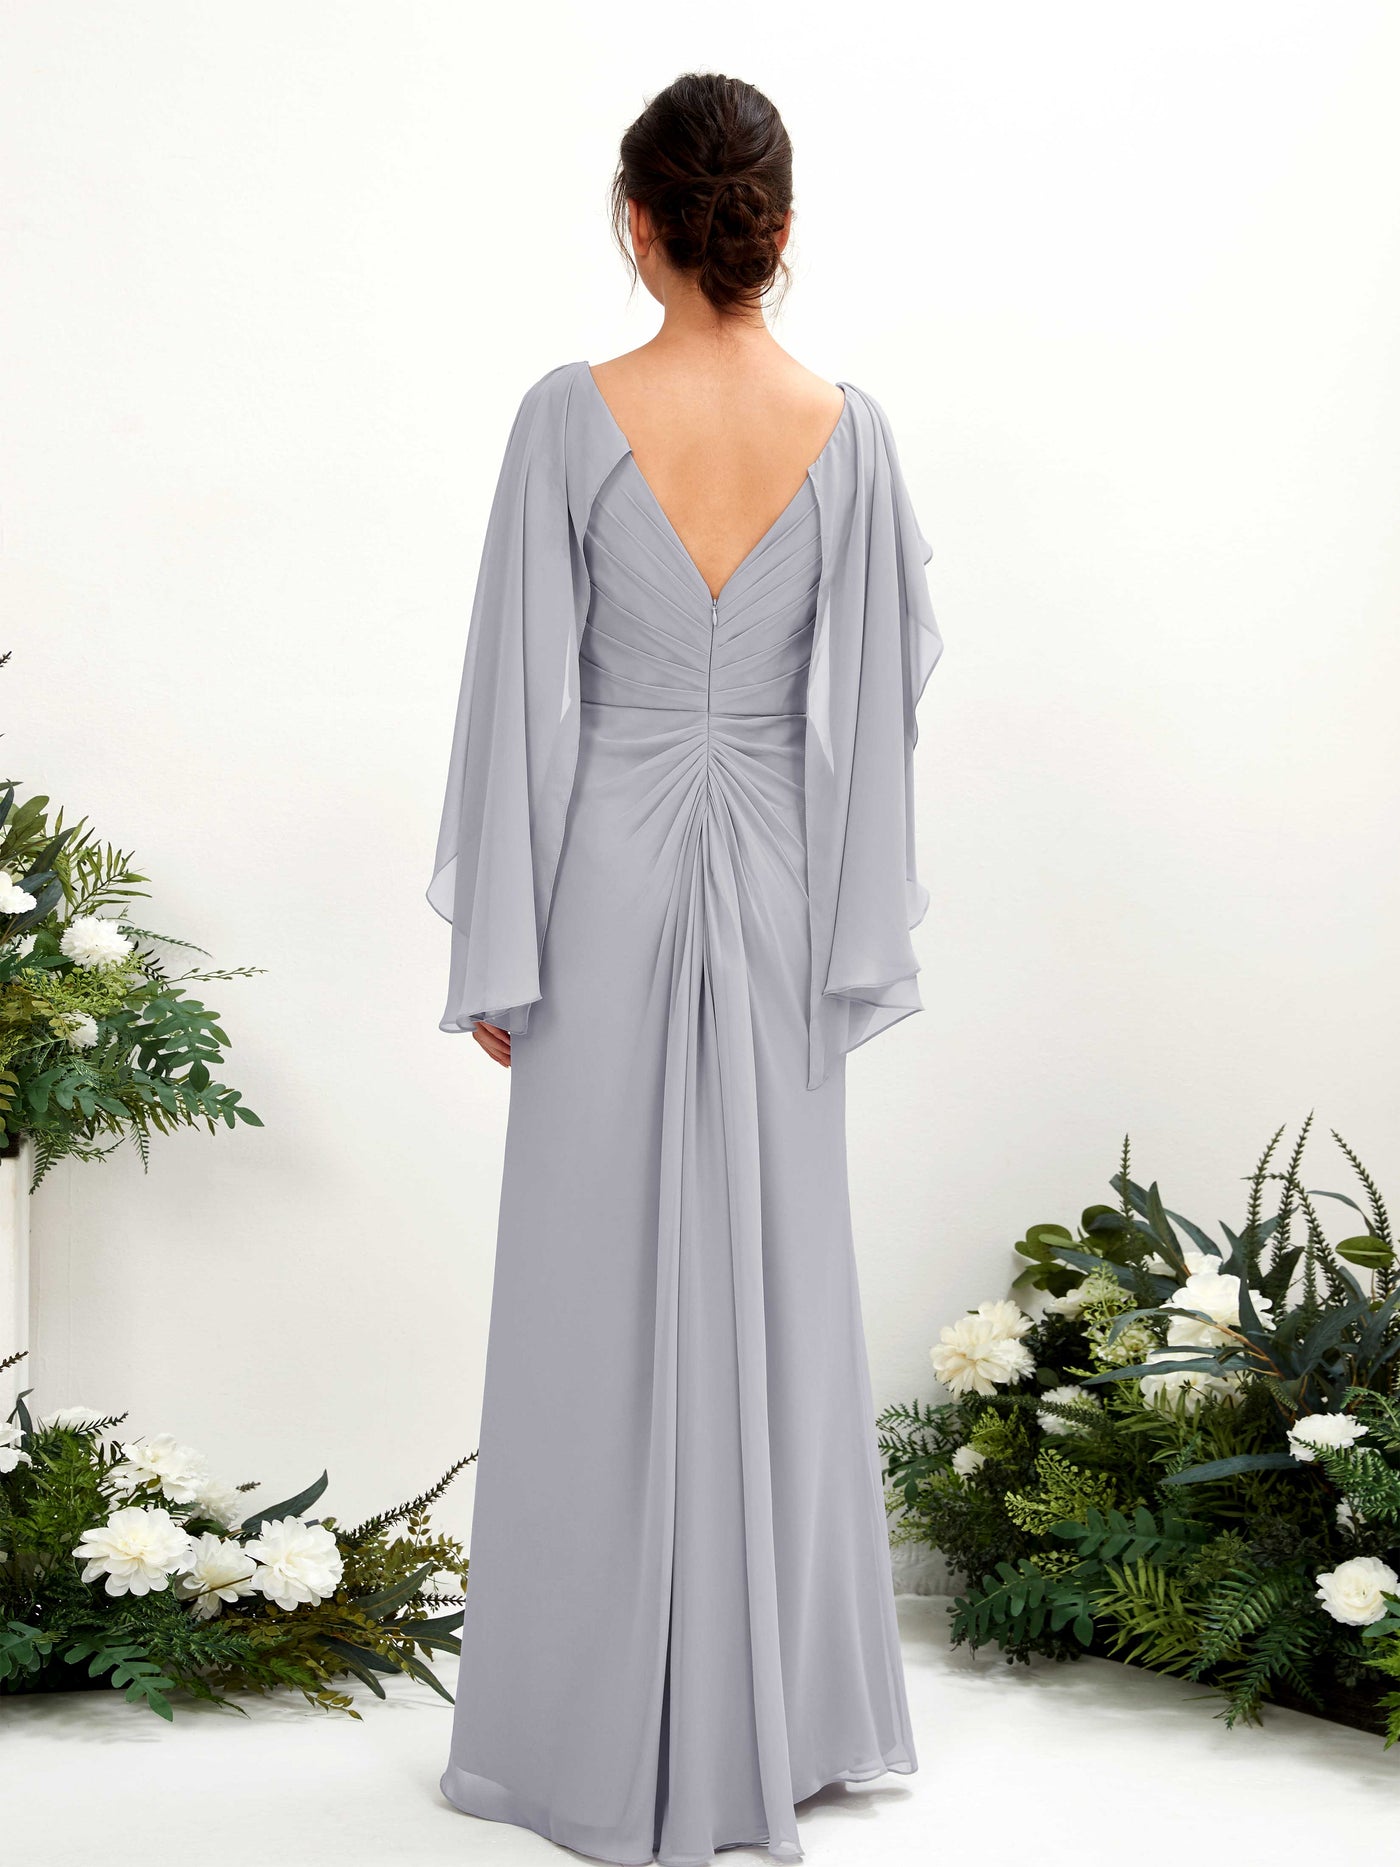 Dusty Lavender Bridesmaid Dresses Bridesmaid Dress A-line Chiffon Straps Full Length Long Sleeves Wedding Party Dress (80220103)#color_dusty-lavender